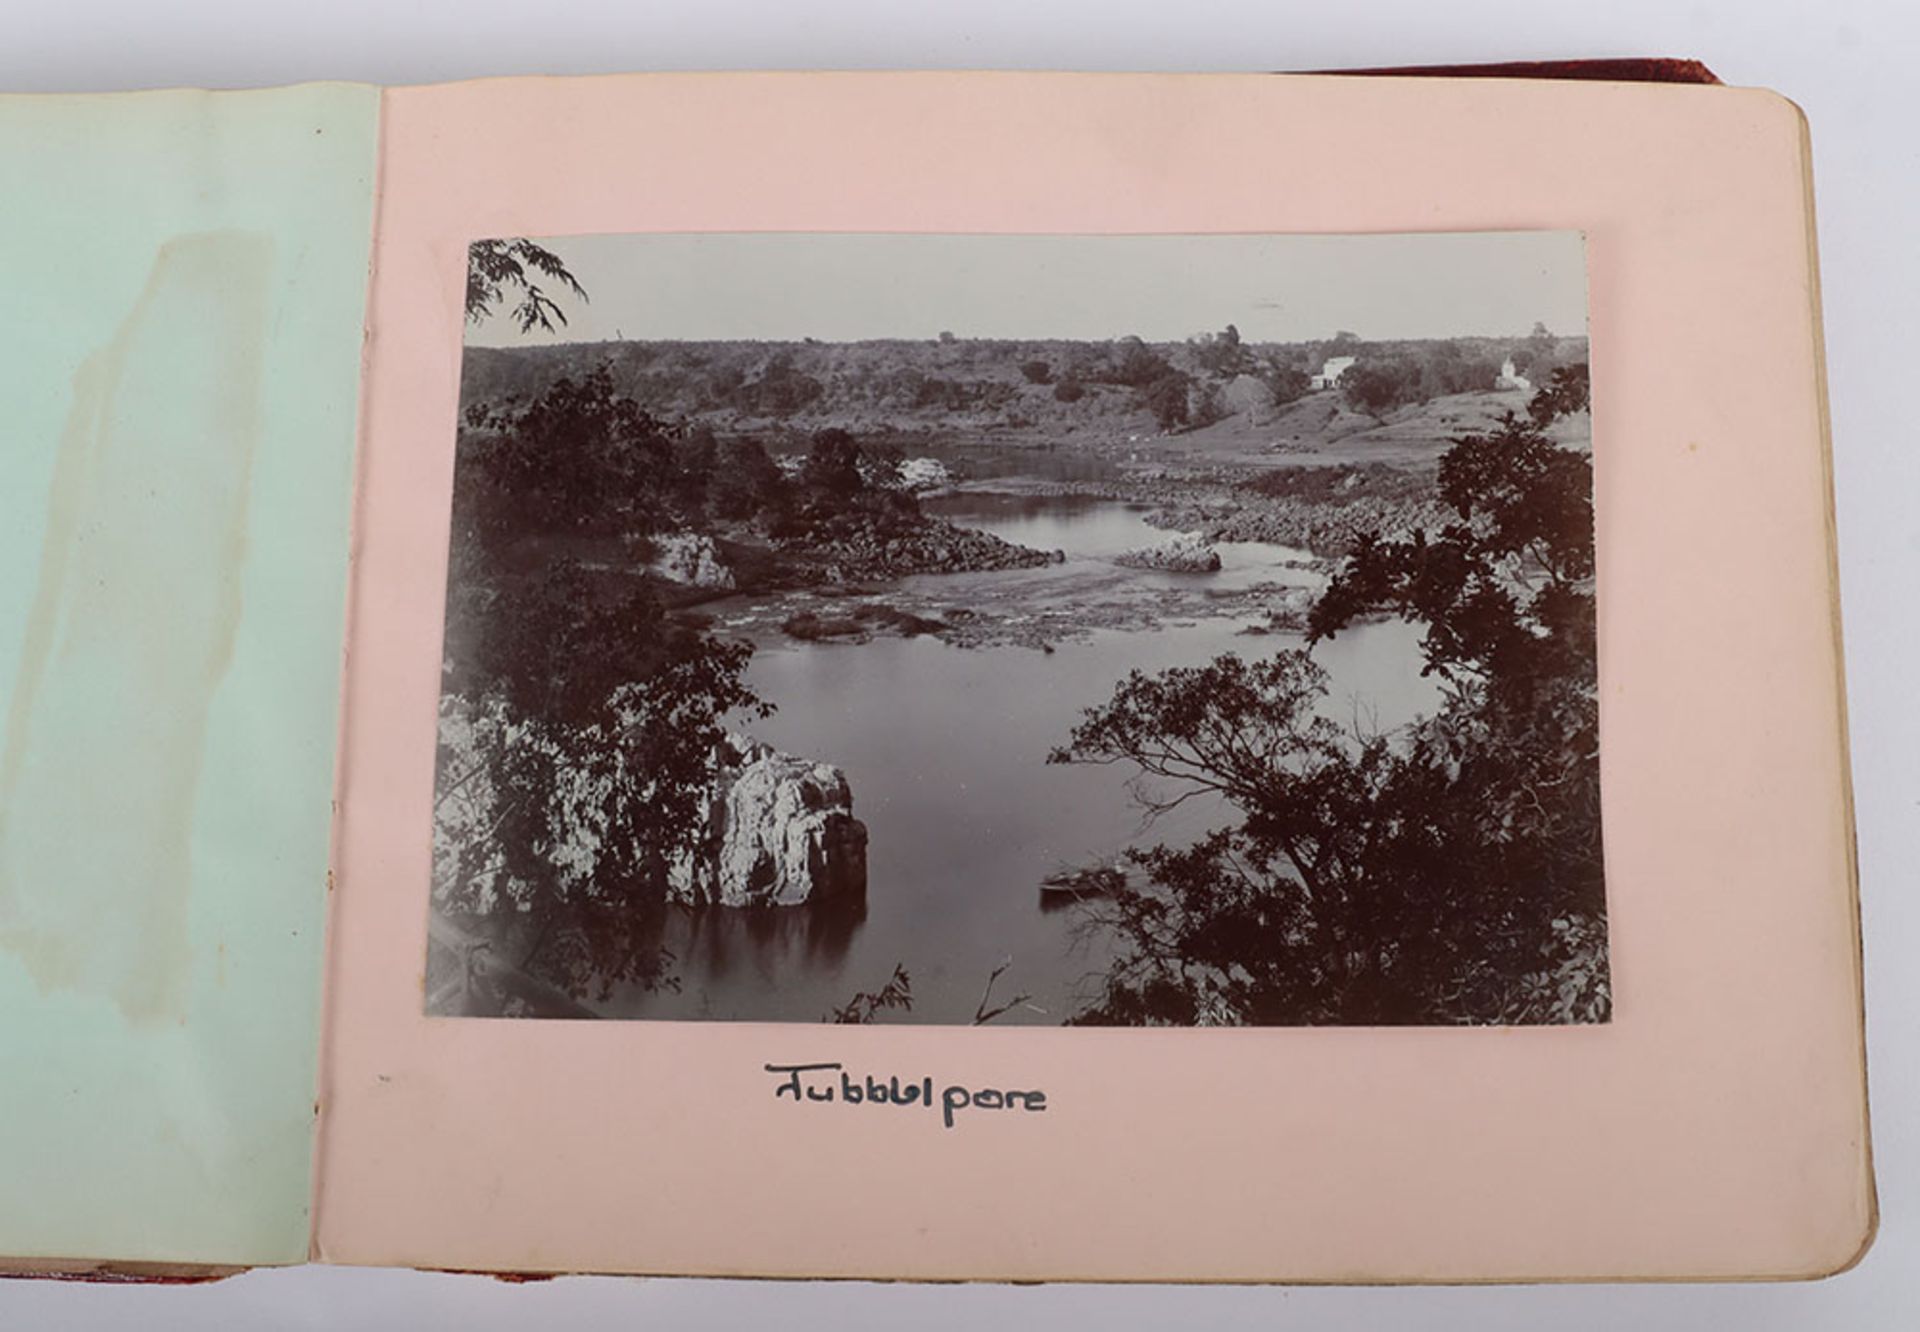 Photograph Album with images of ther Delhi Durbar, troops lining streets, Elephants, sacred cows bel - Image 9 of 48